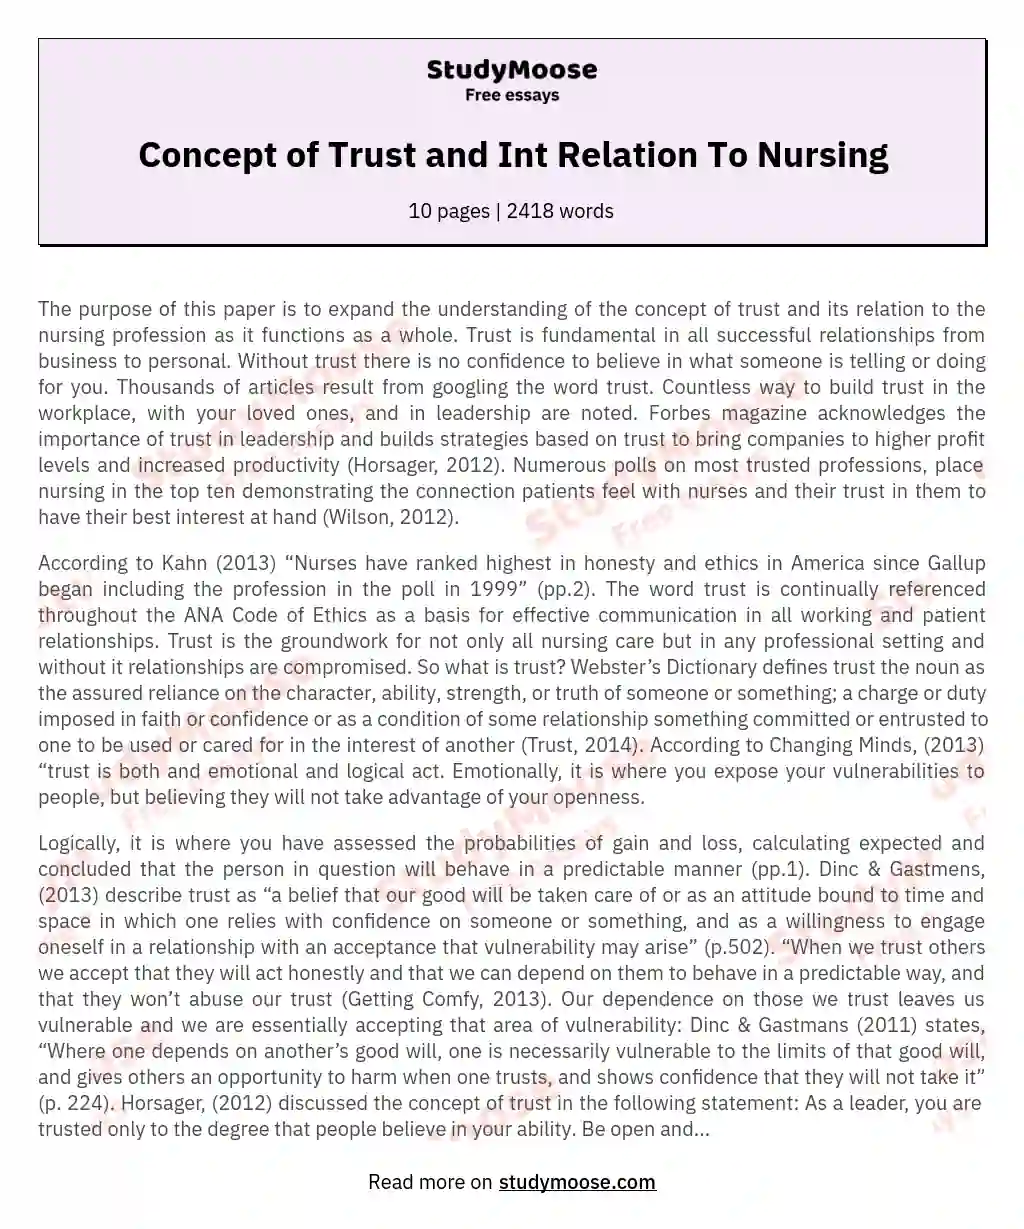 Concept of Trust and Int Relation To Nursing